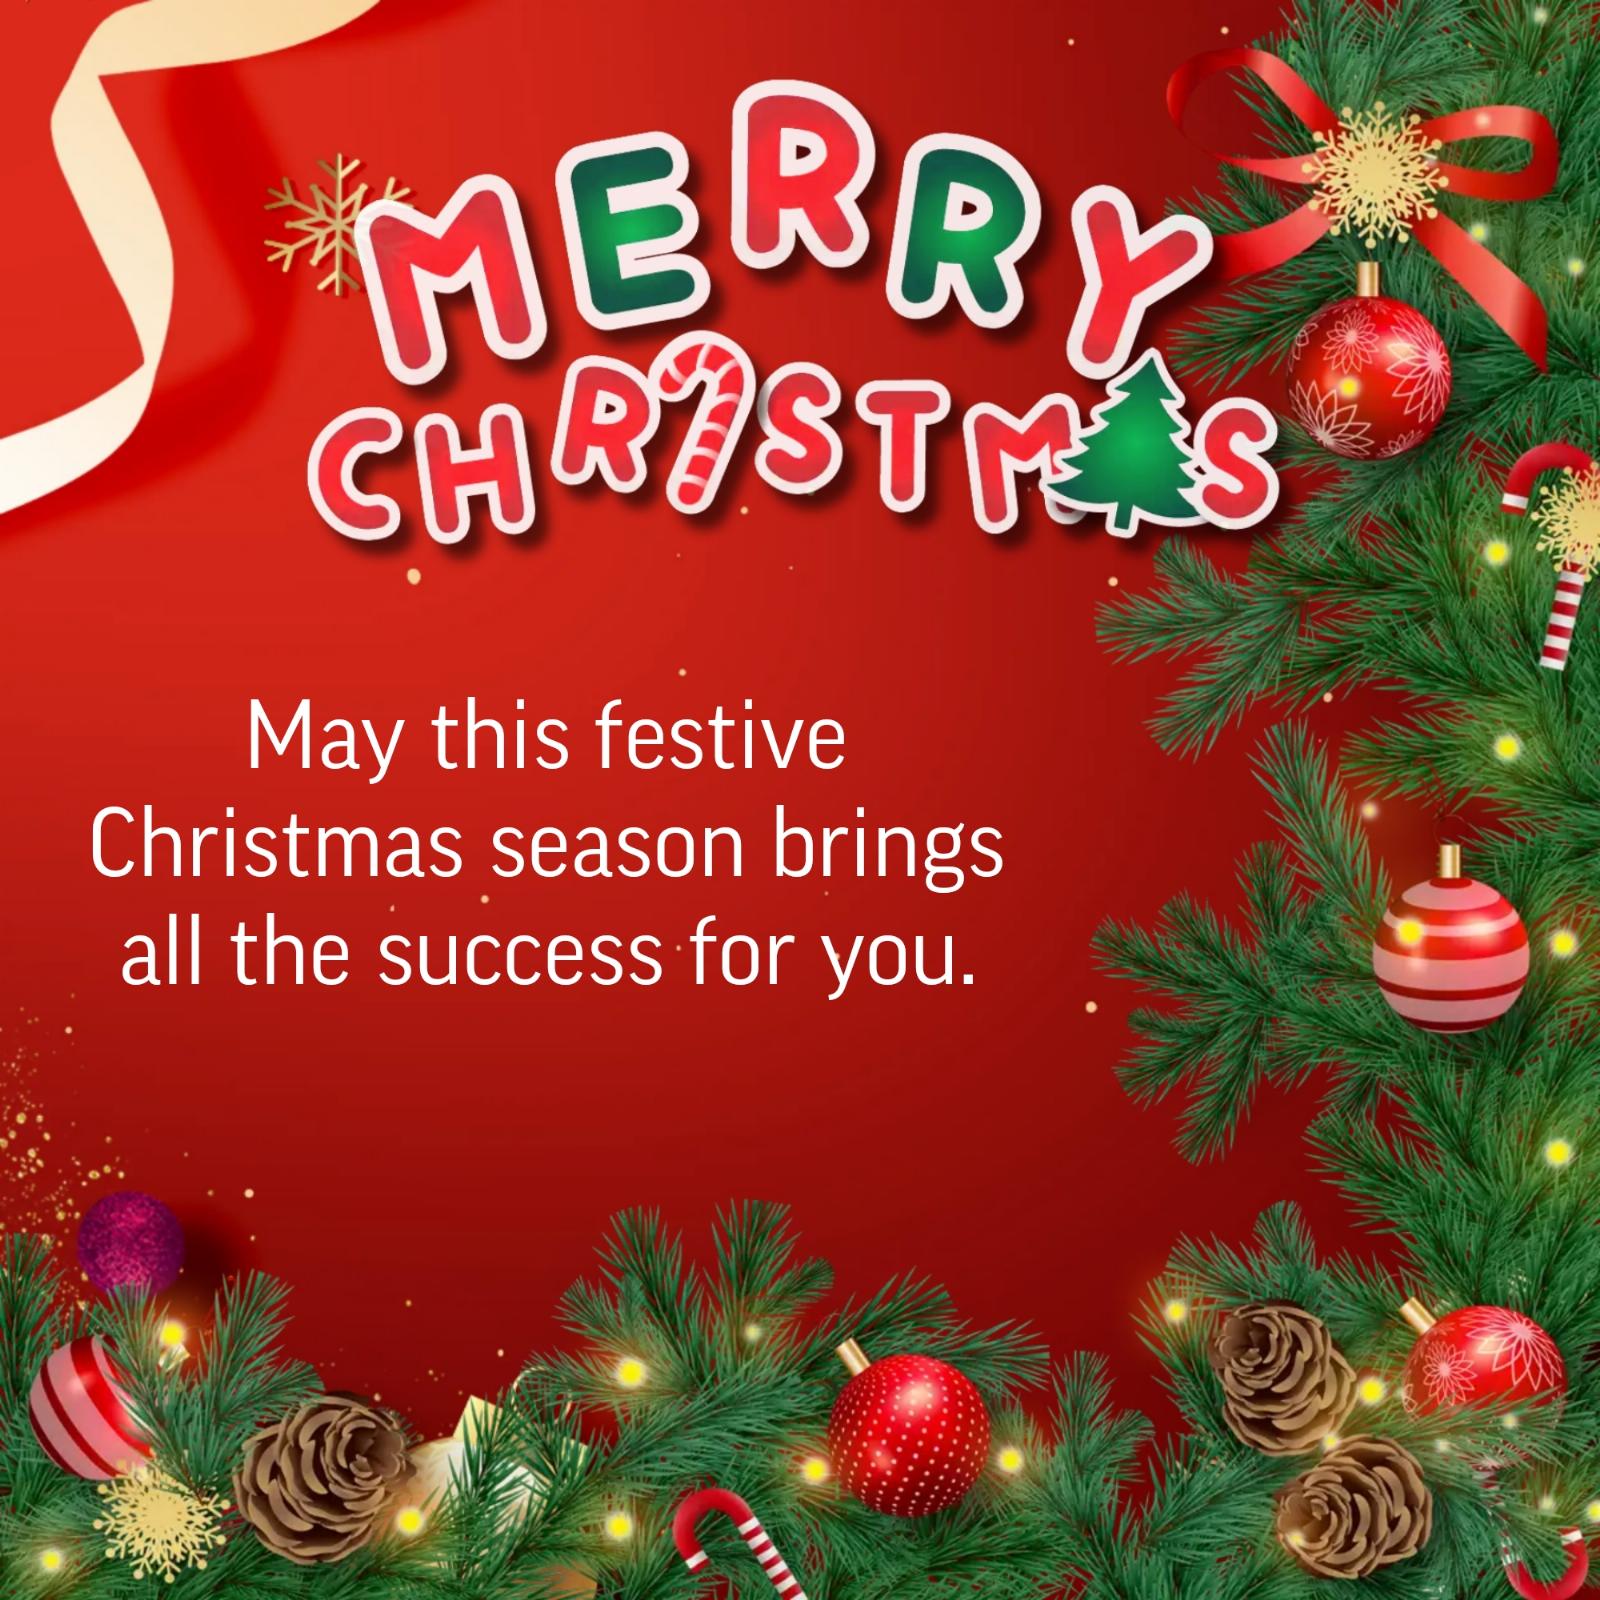 May the festive season bring you happiness cheer and peace of mind